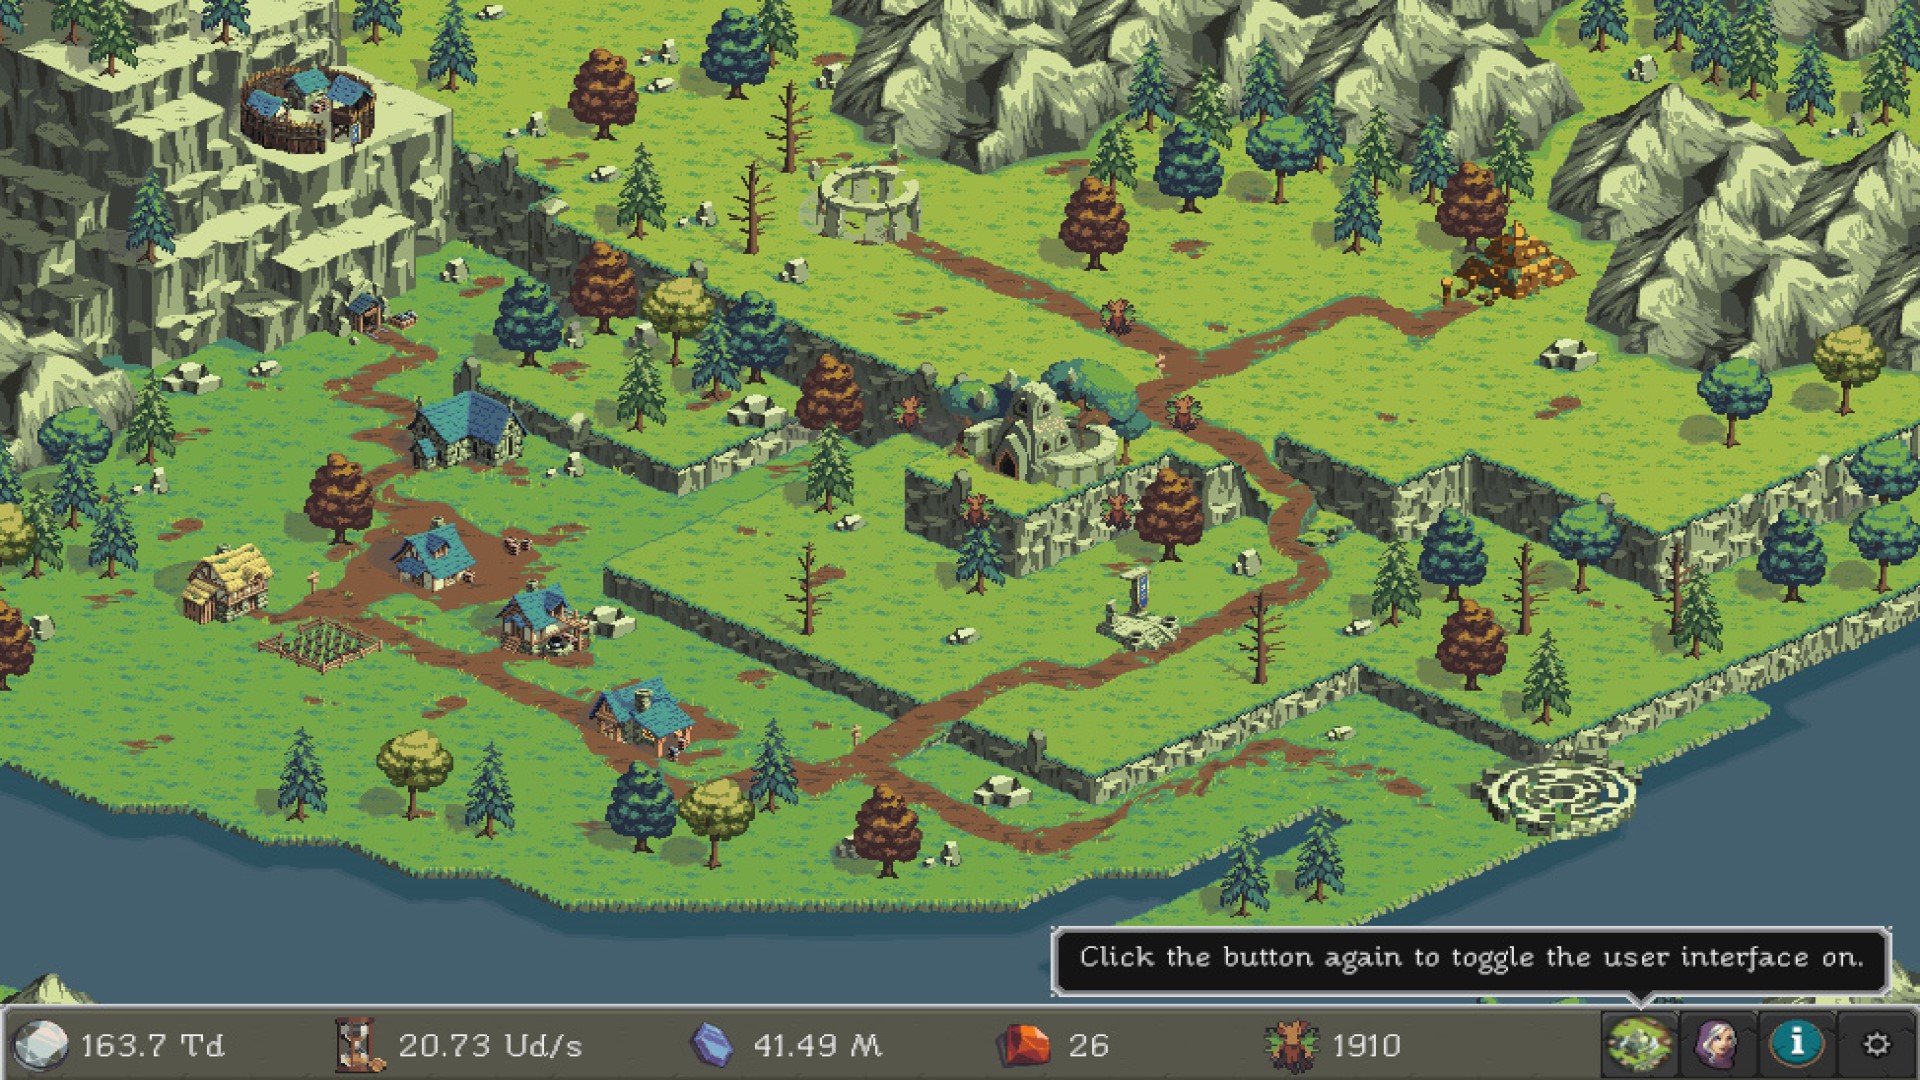 Best idle games: Realm Grinder. Image shows an isometric view of a field near mountains.